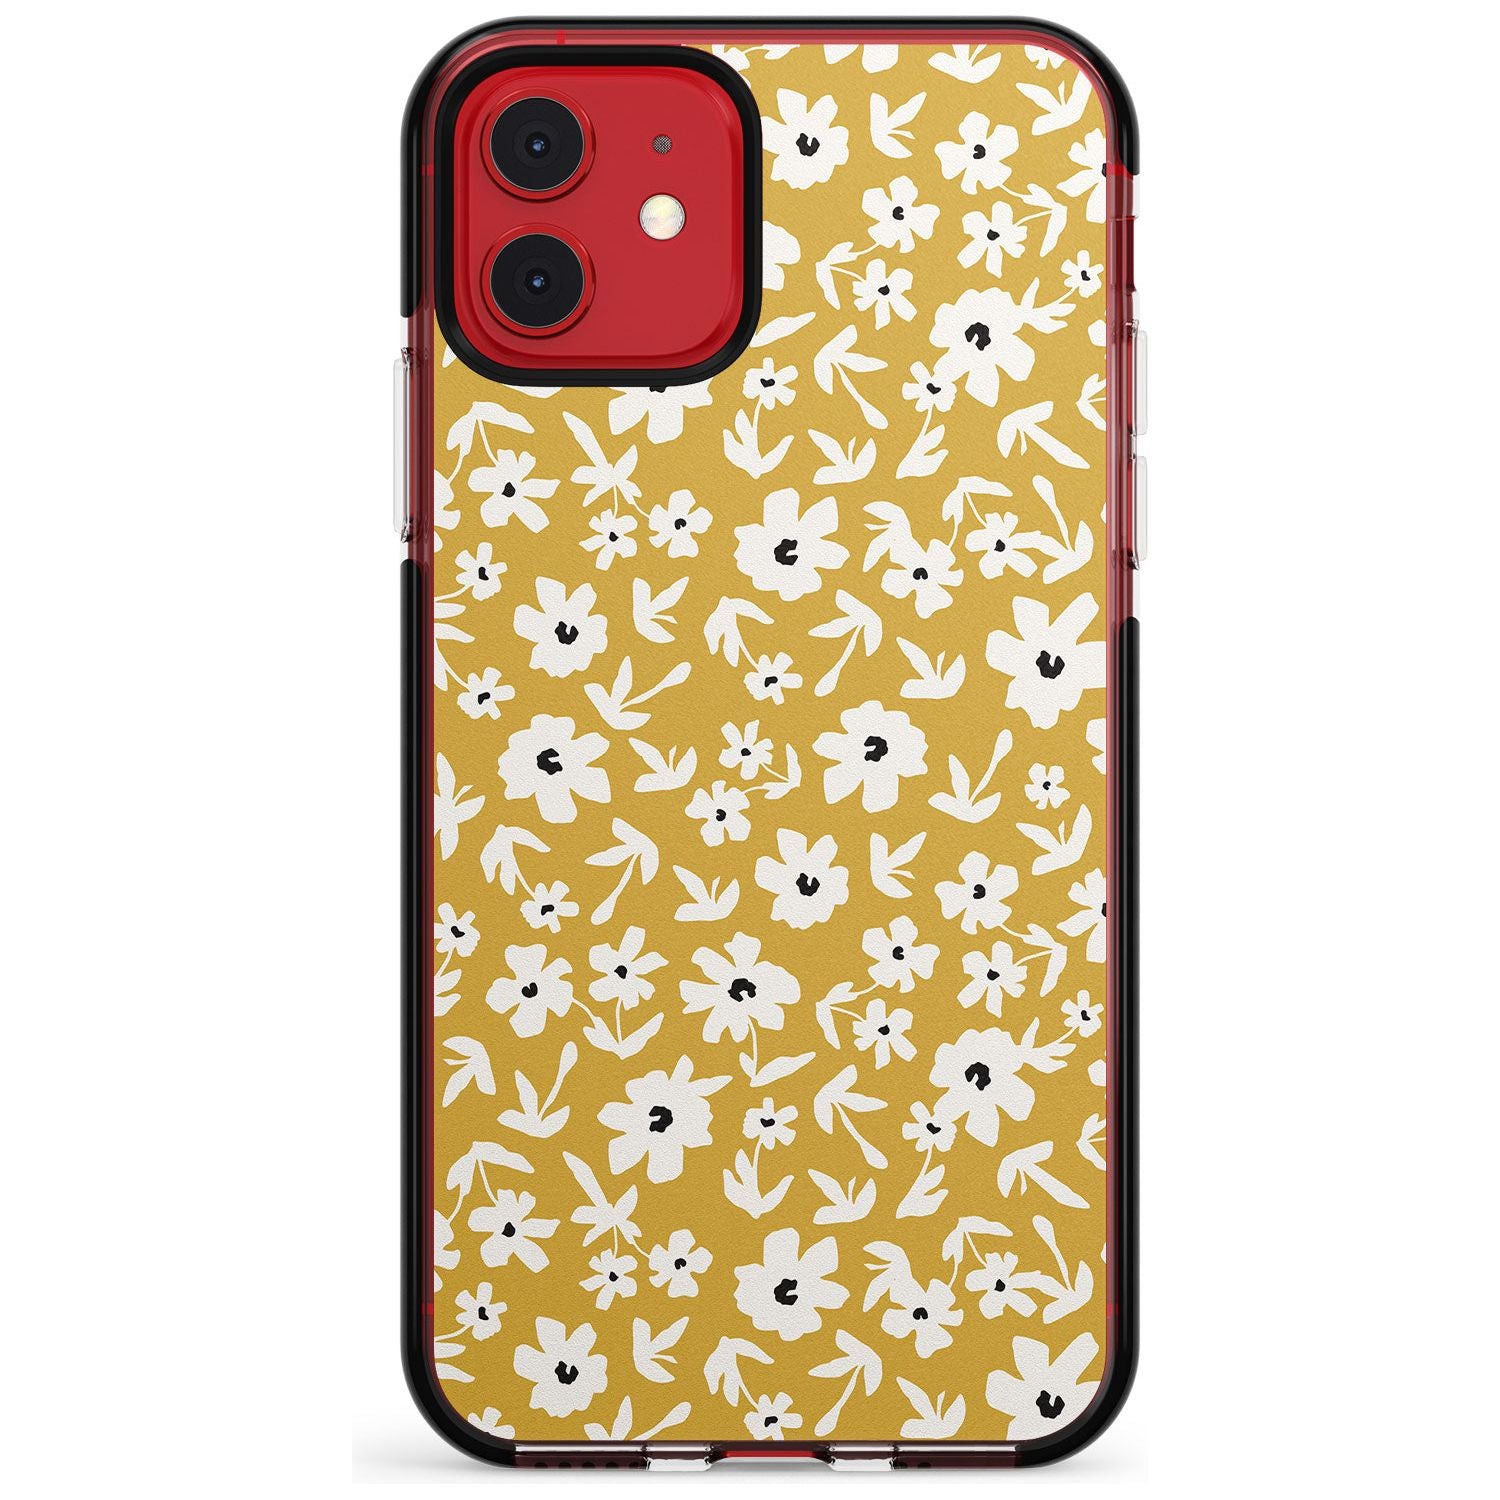 Floral Print on Mustard - Cute Floral Design Pink Fade Impact Phone Case for iPhone 11 Pro Max